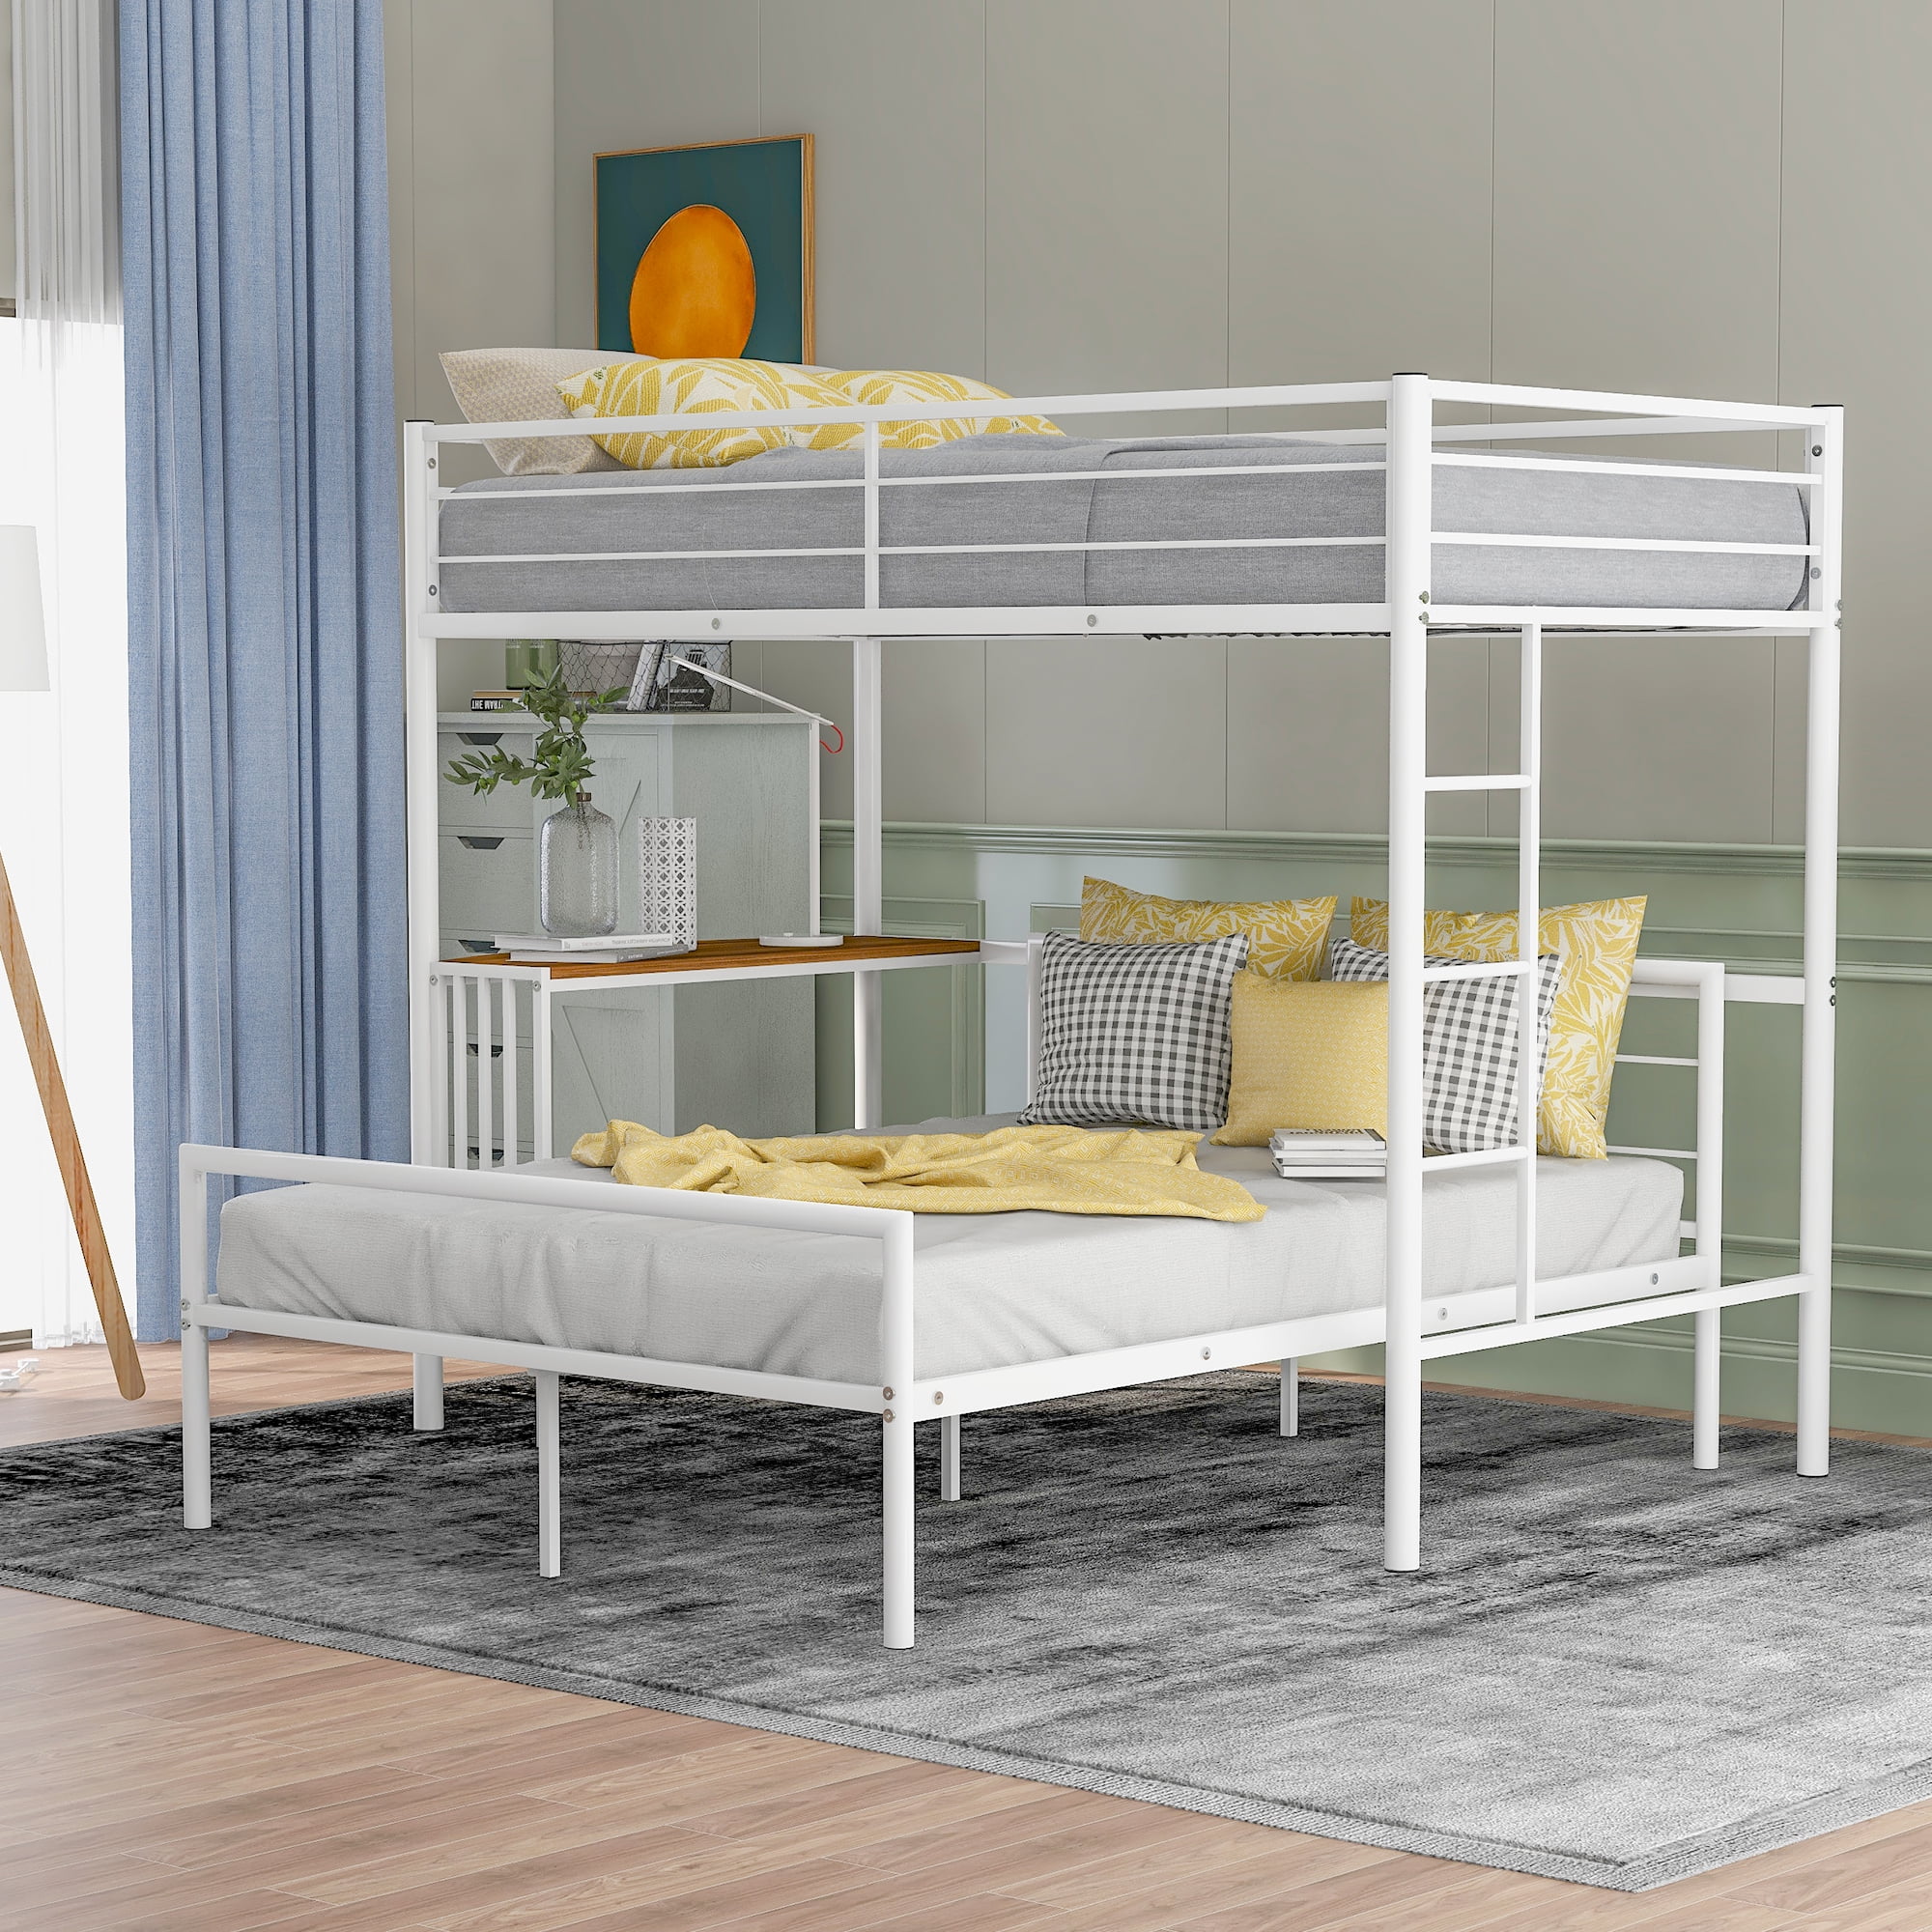 Metal Loft Bed Twin Size And Platform, Full Size Metal Bunk Bed With Desk